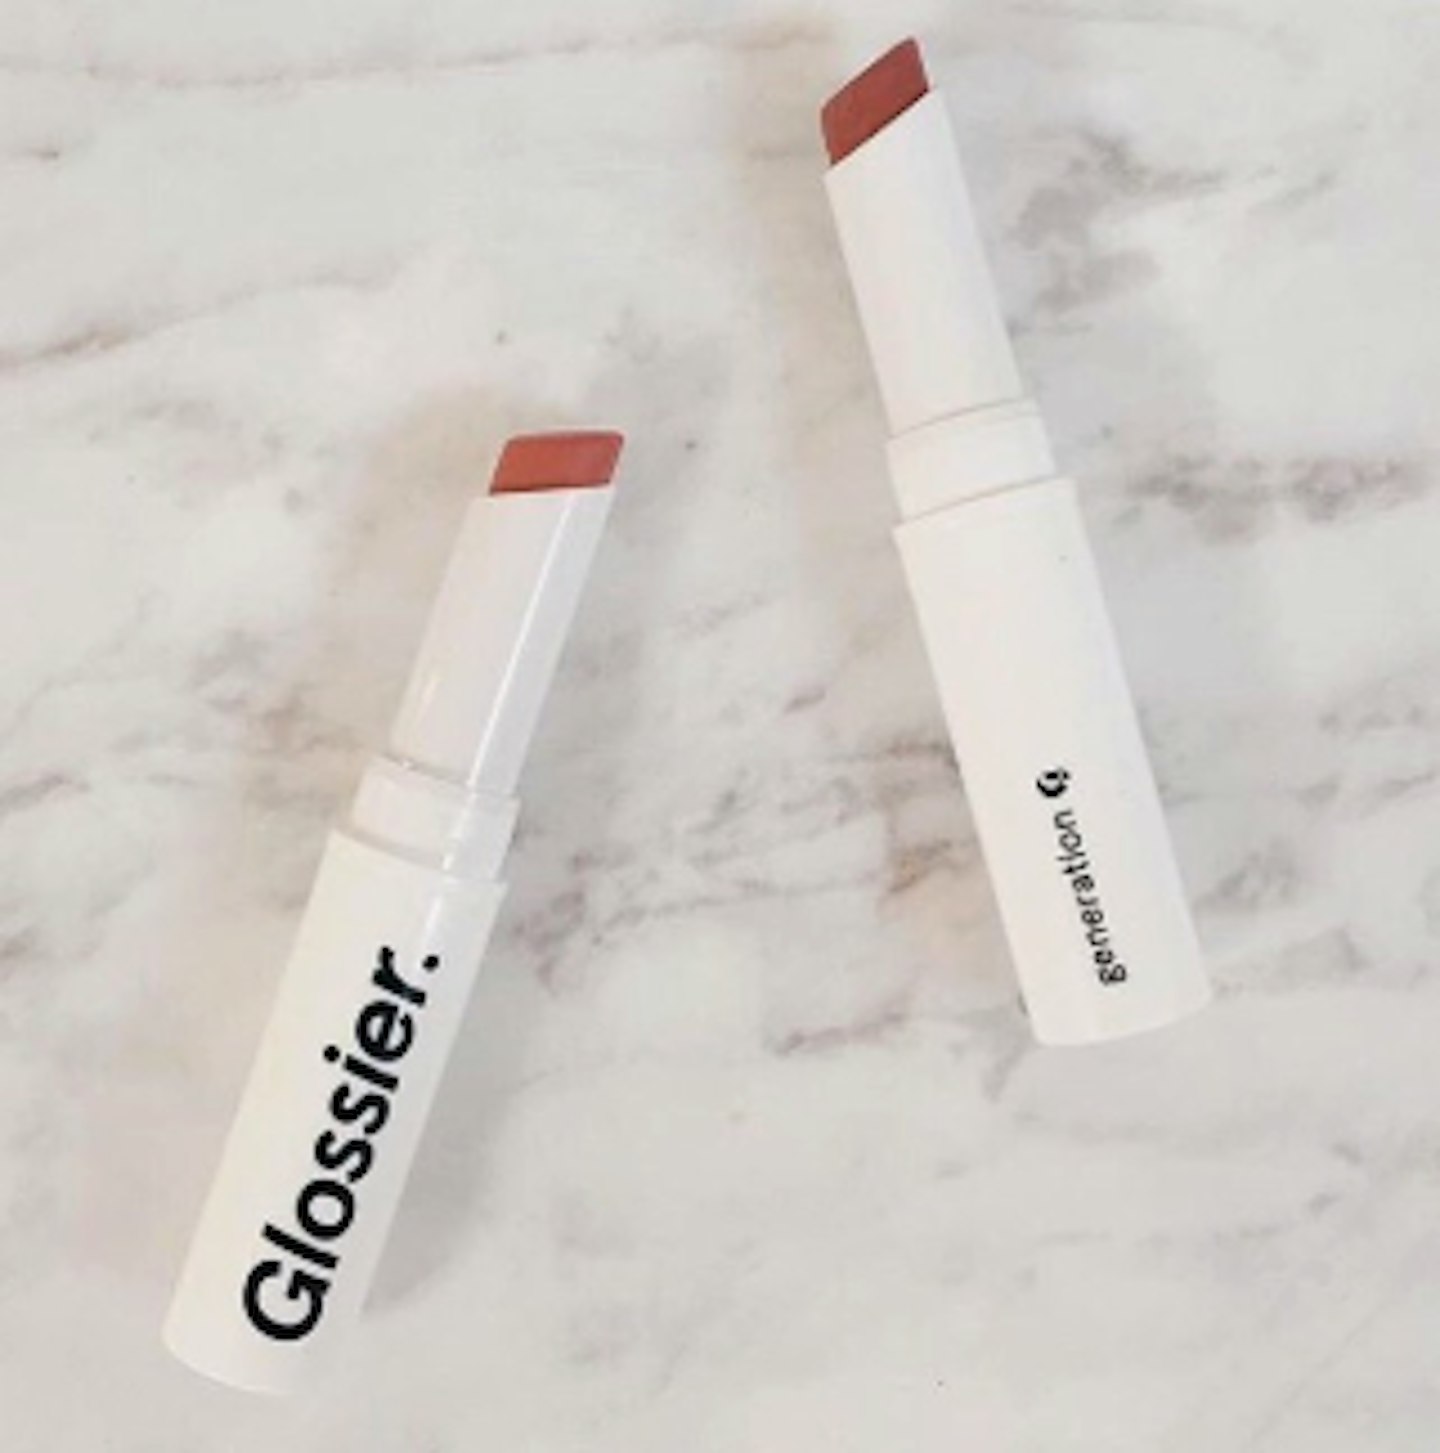 The Best Products From Glossier UK